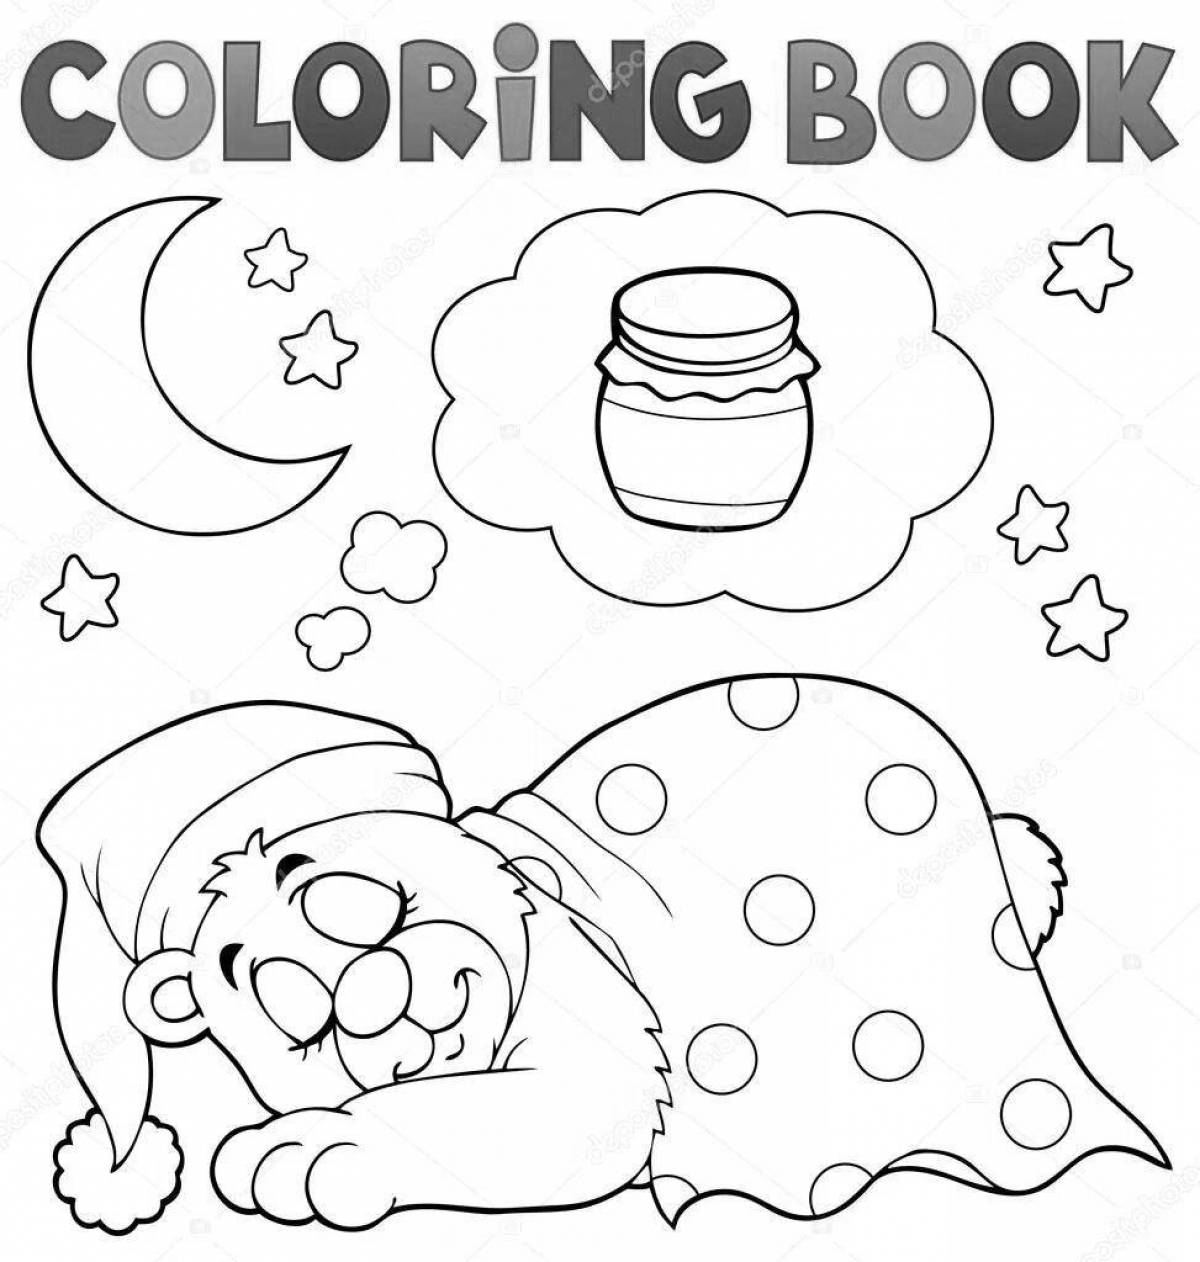 Fabulous bear in the lair coloring book for kids